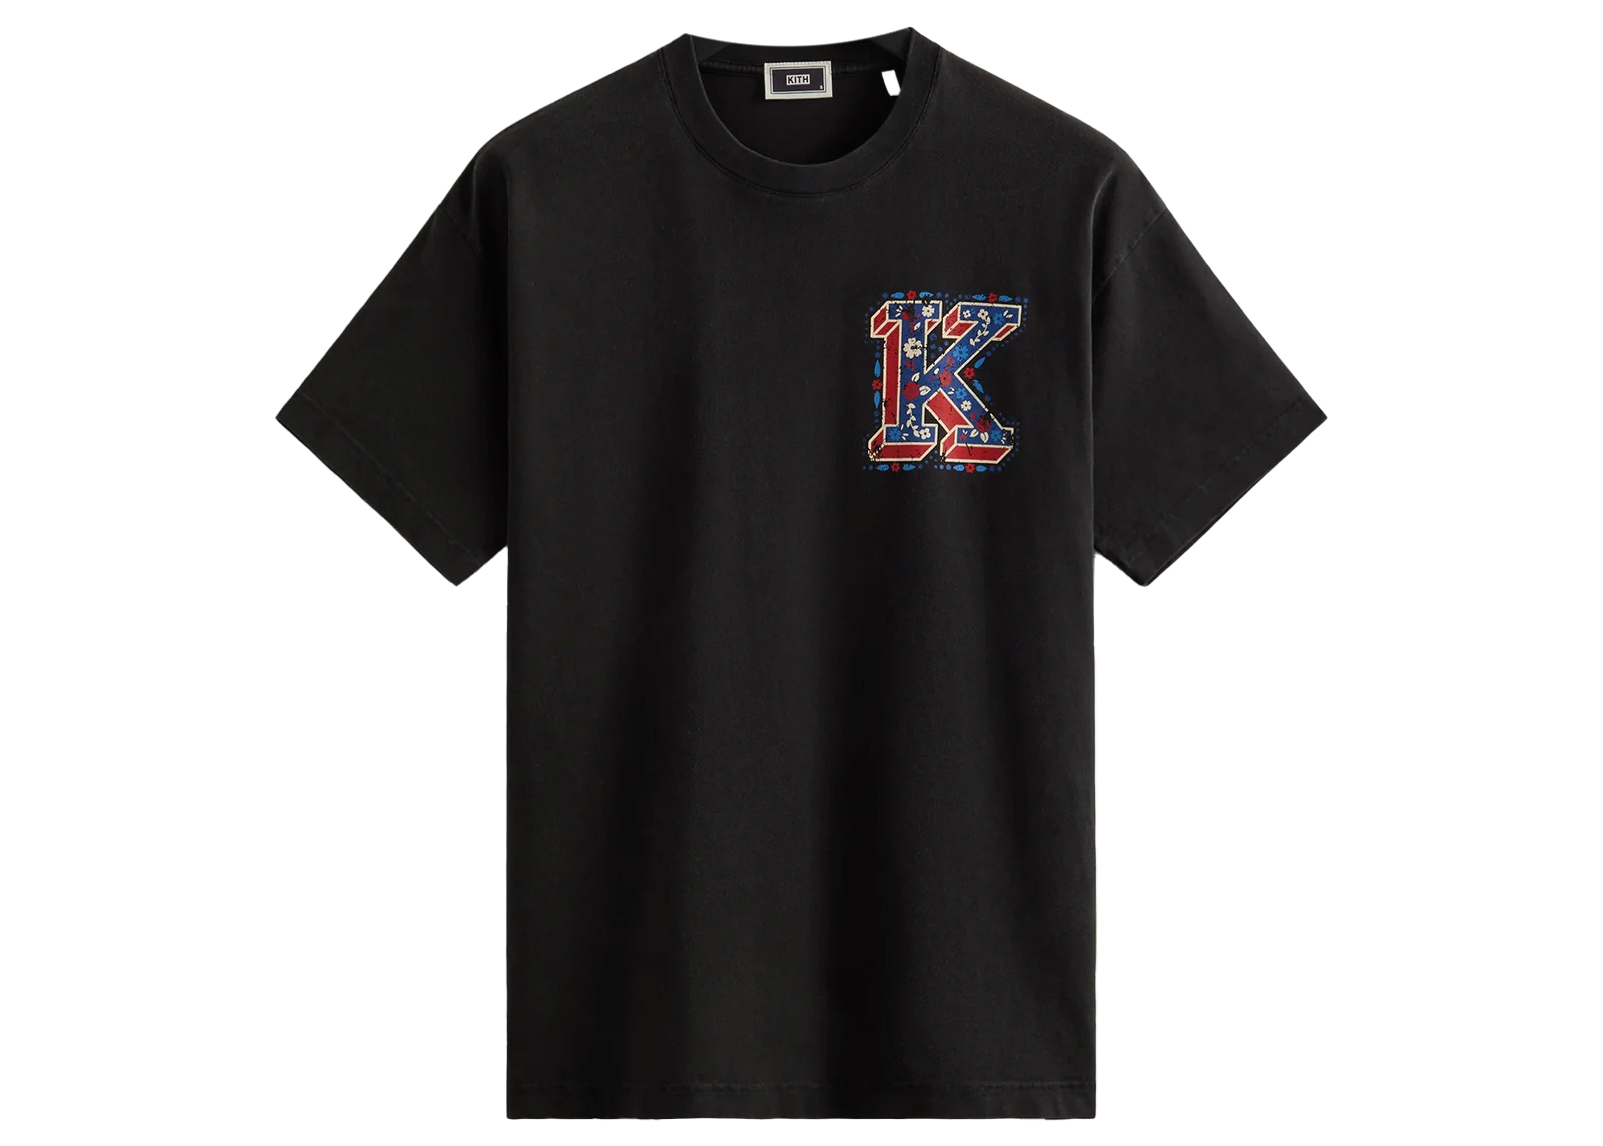 kith Tシャツ ヴィンテージ平置き